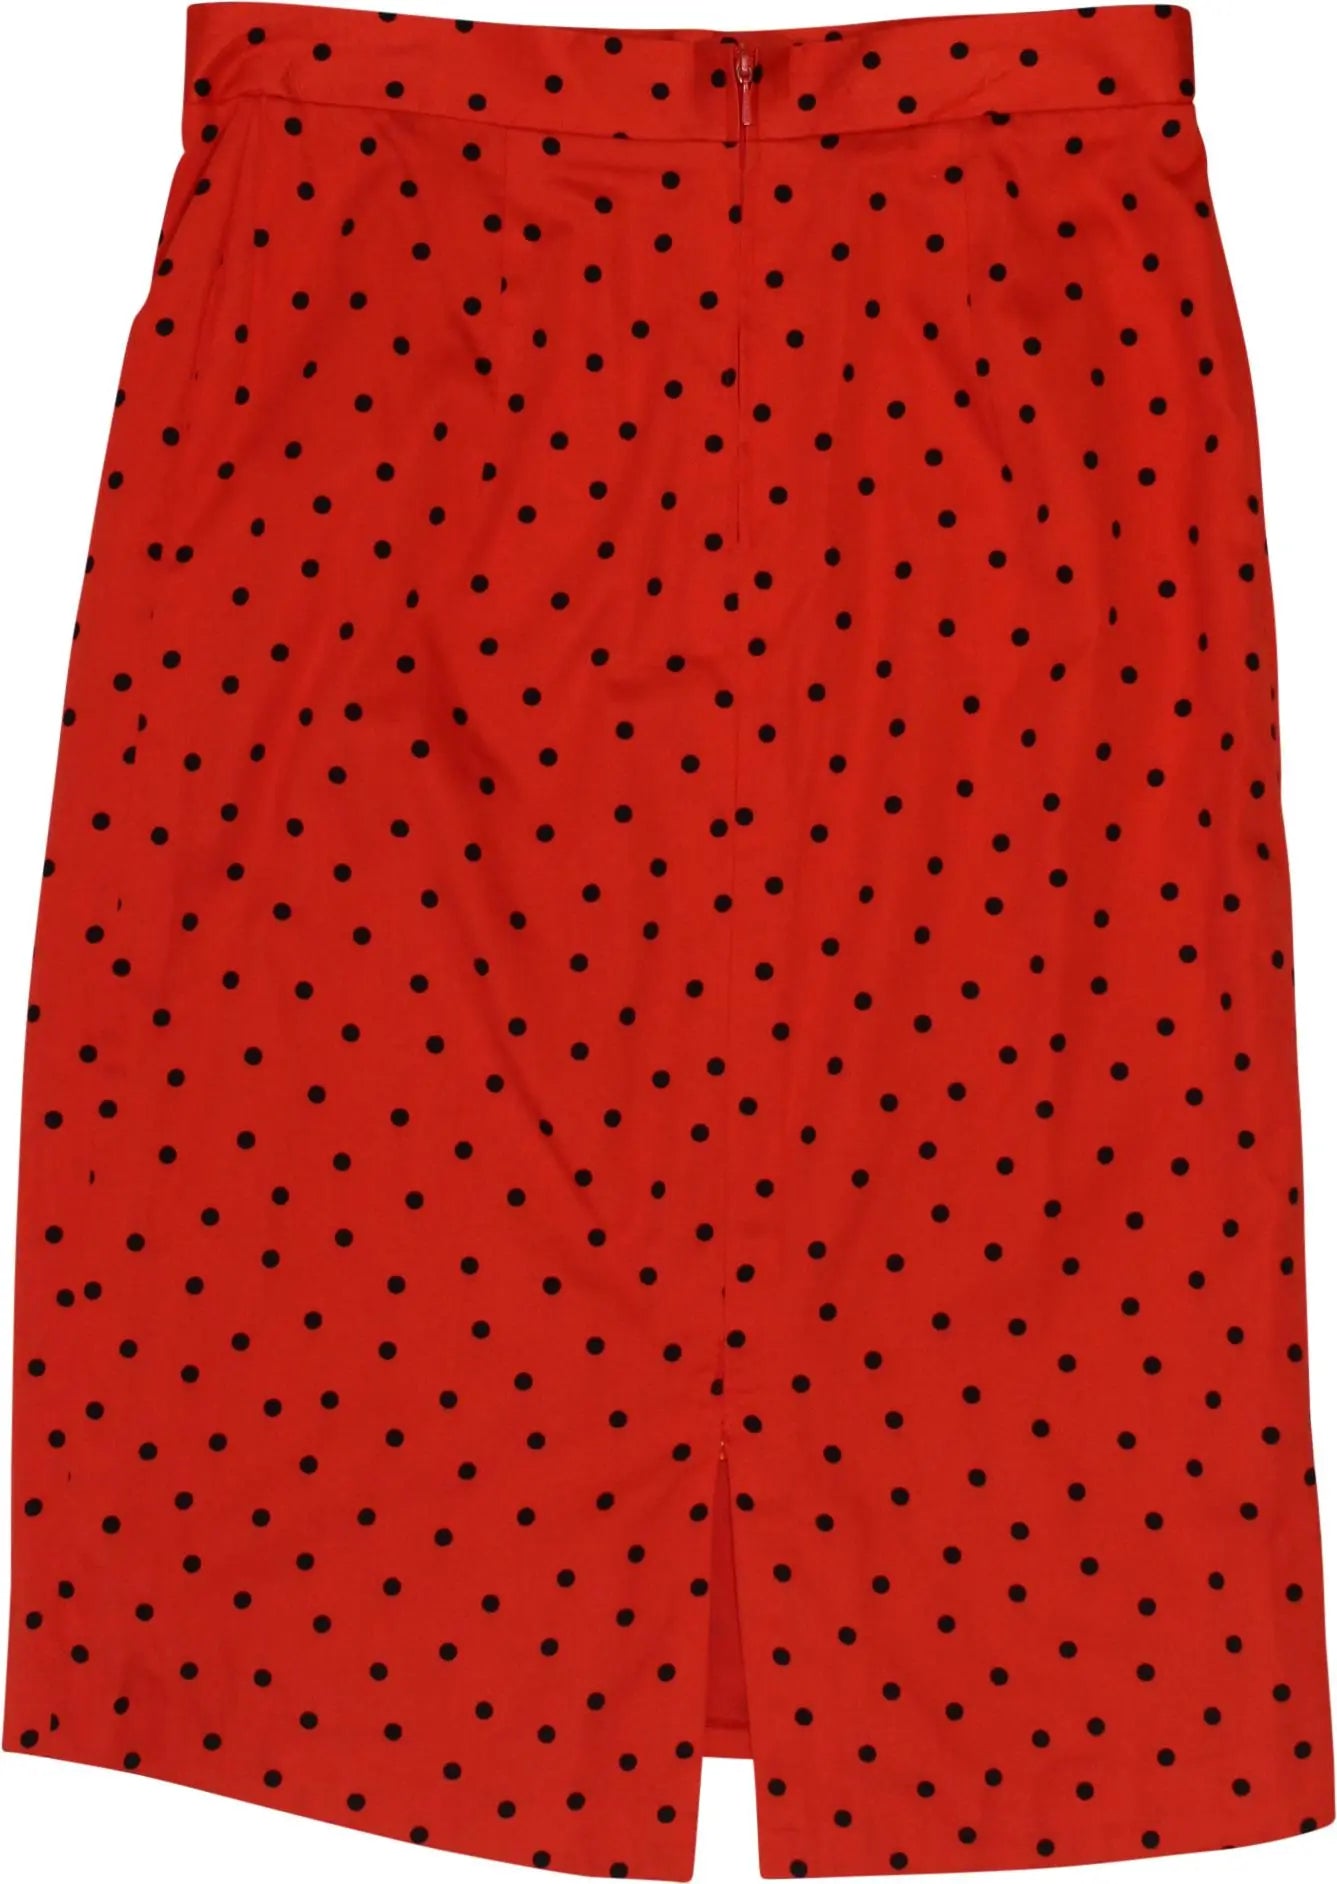 Unknown - Polkadot Skirt- ThriftTale.com - Vintage and second handclothing